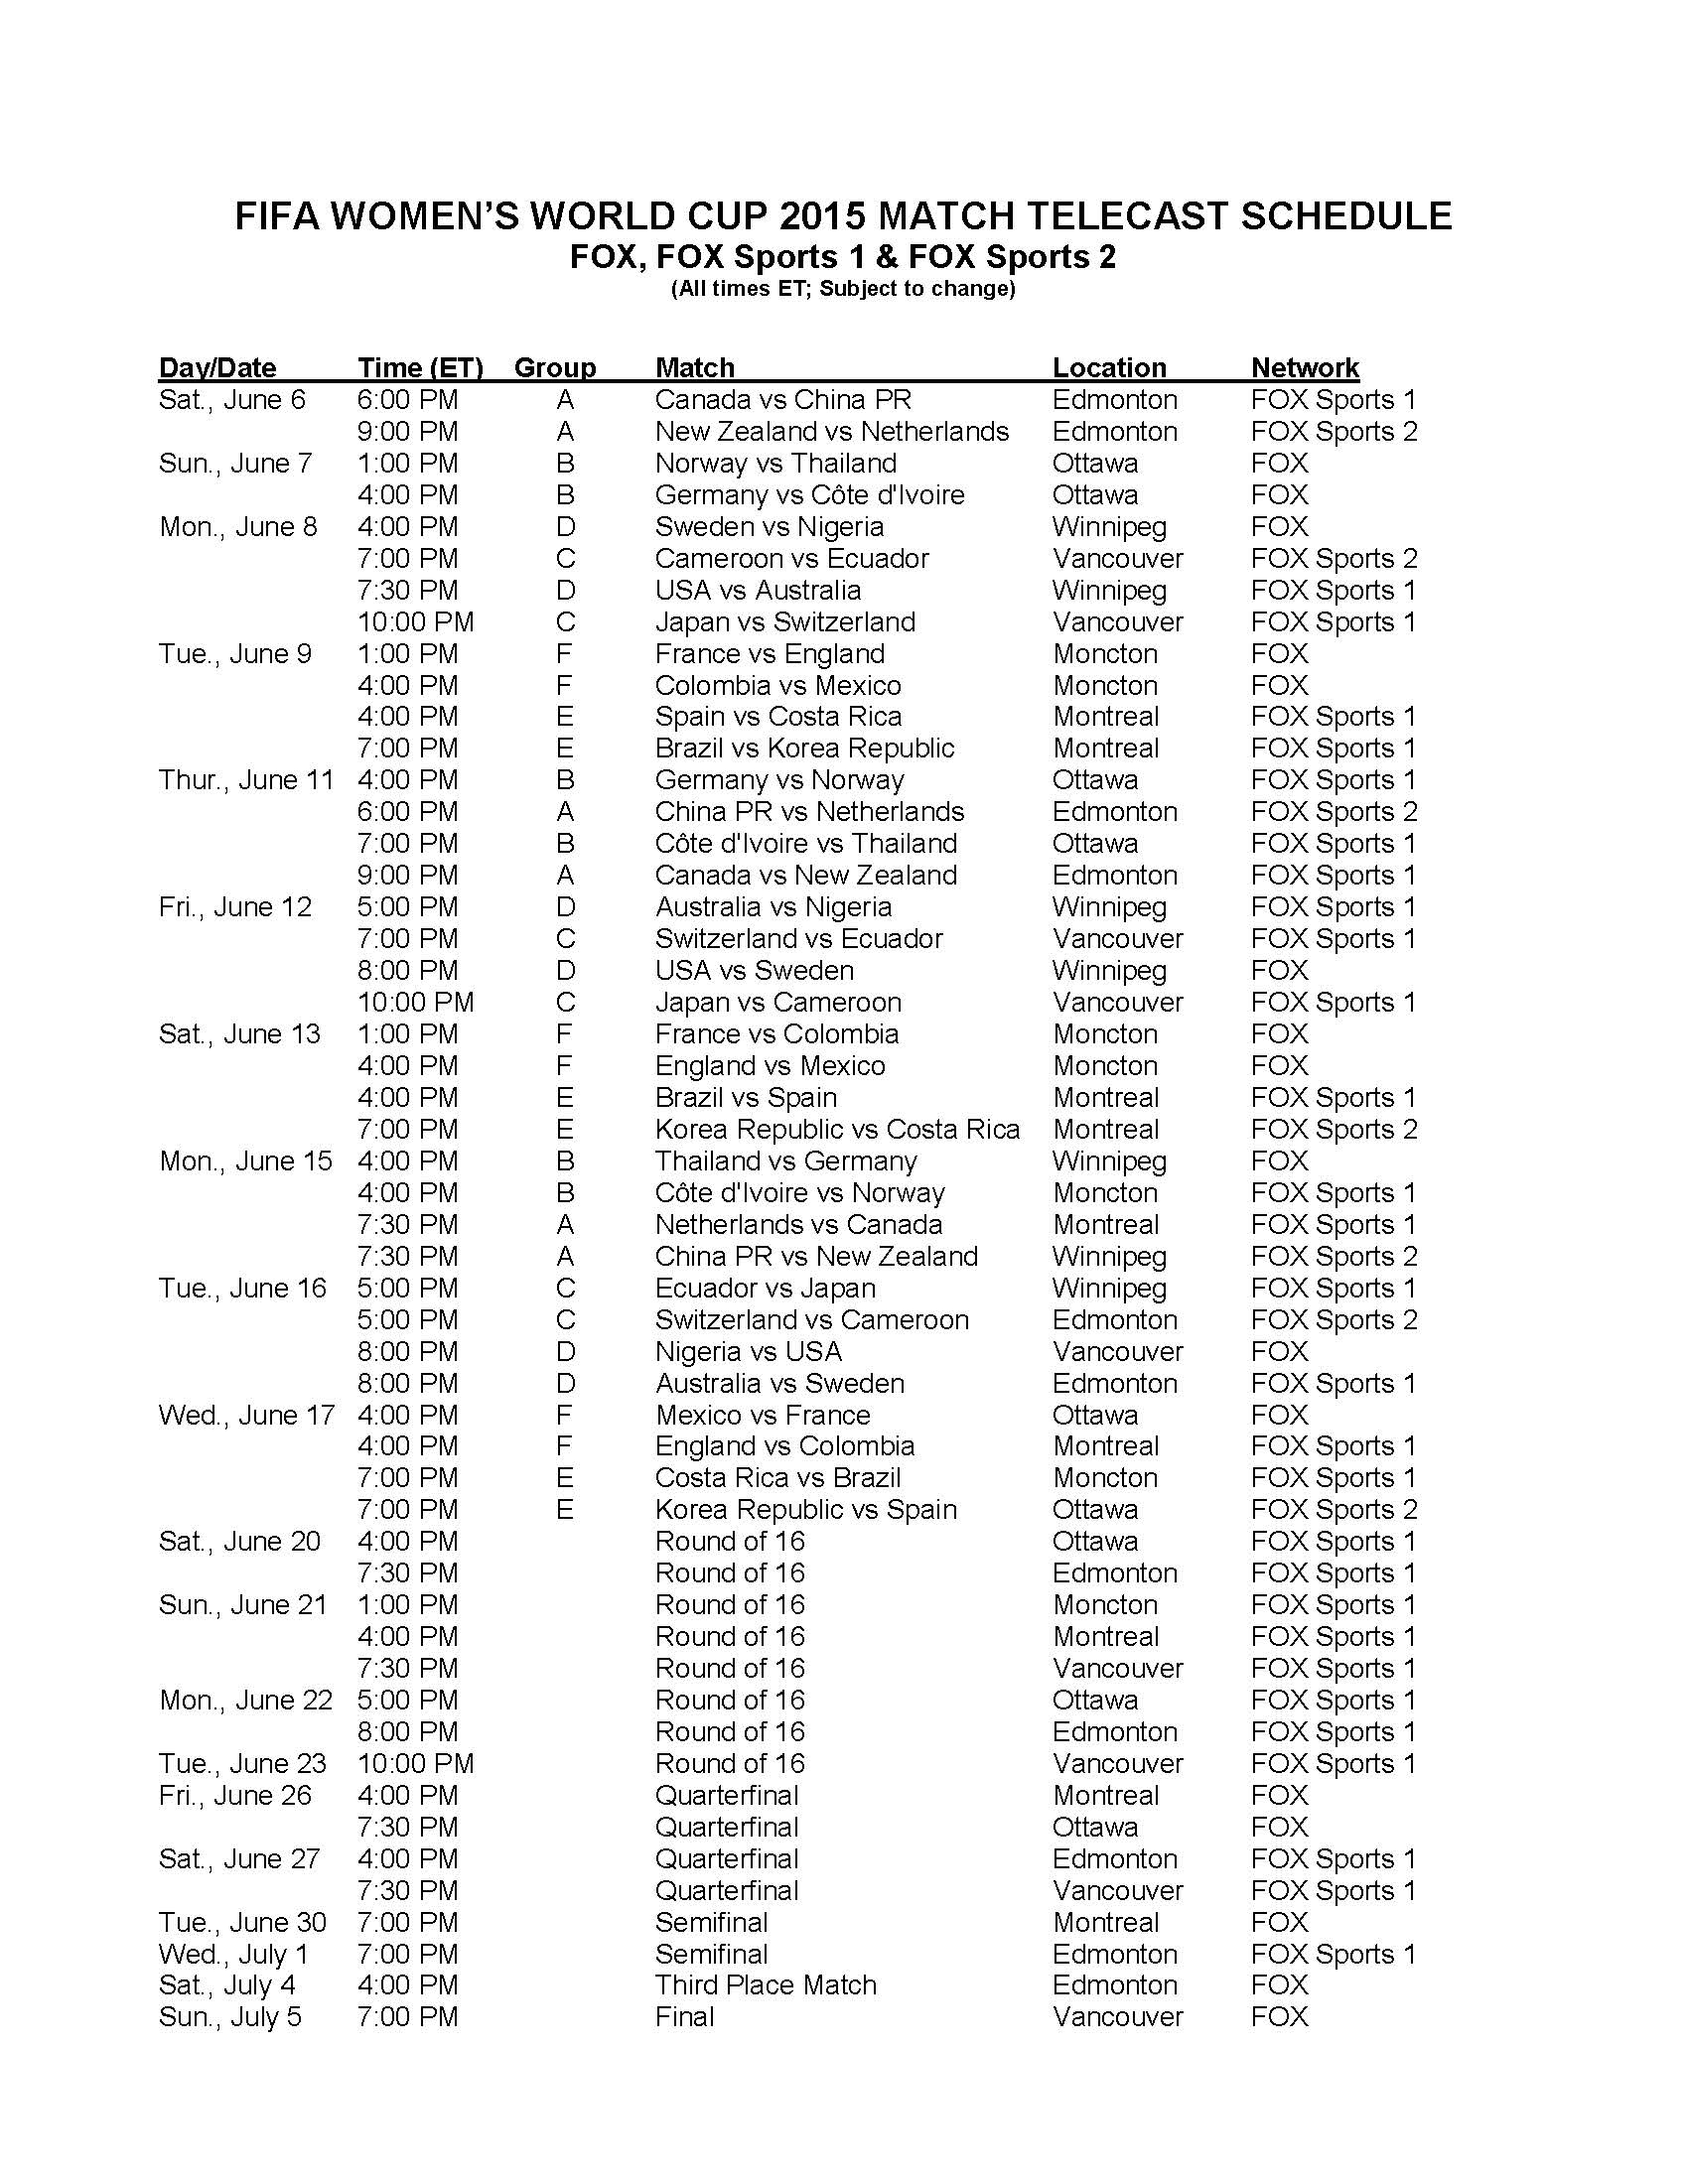 Complete FIFA Womens World Cup Fox Sports Game Schedule 100 Percent Soccer